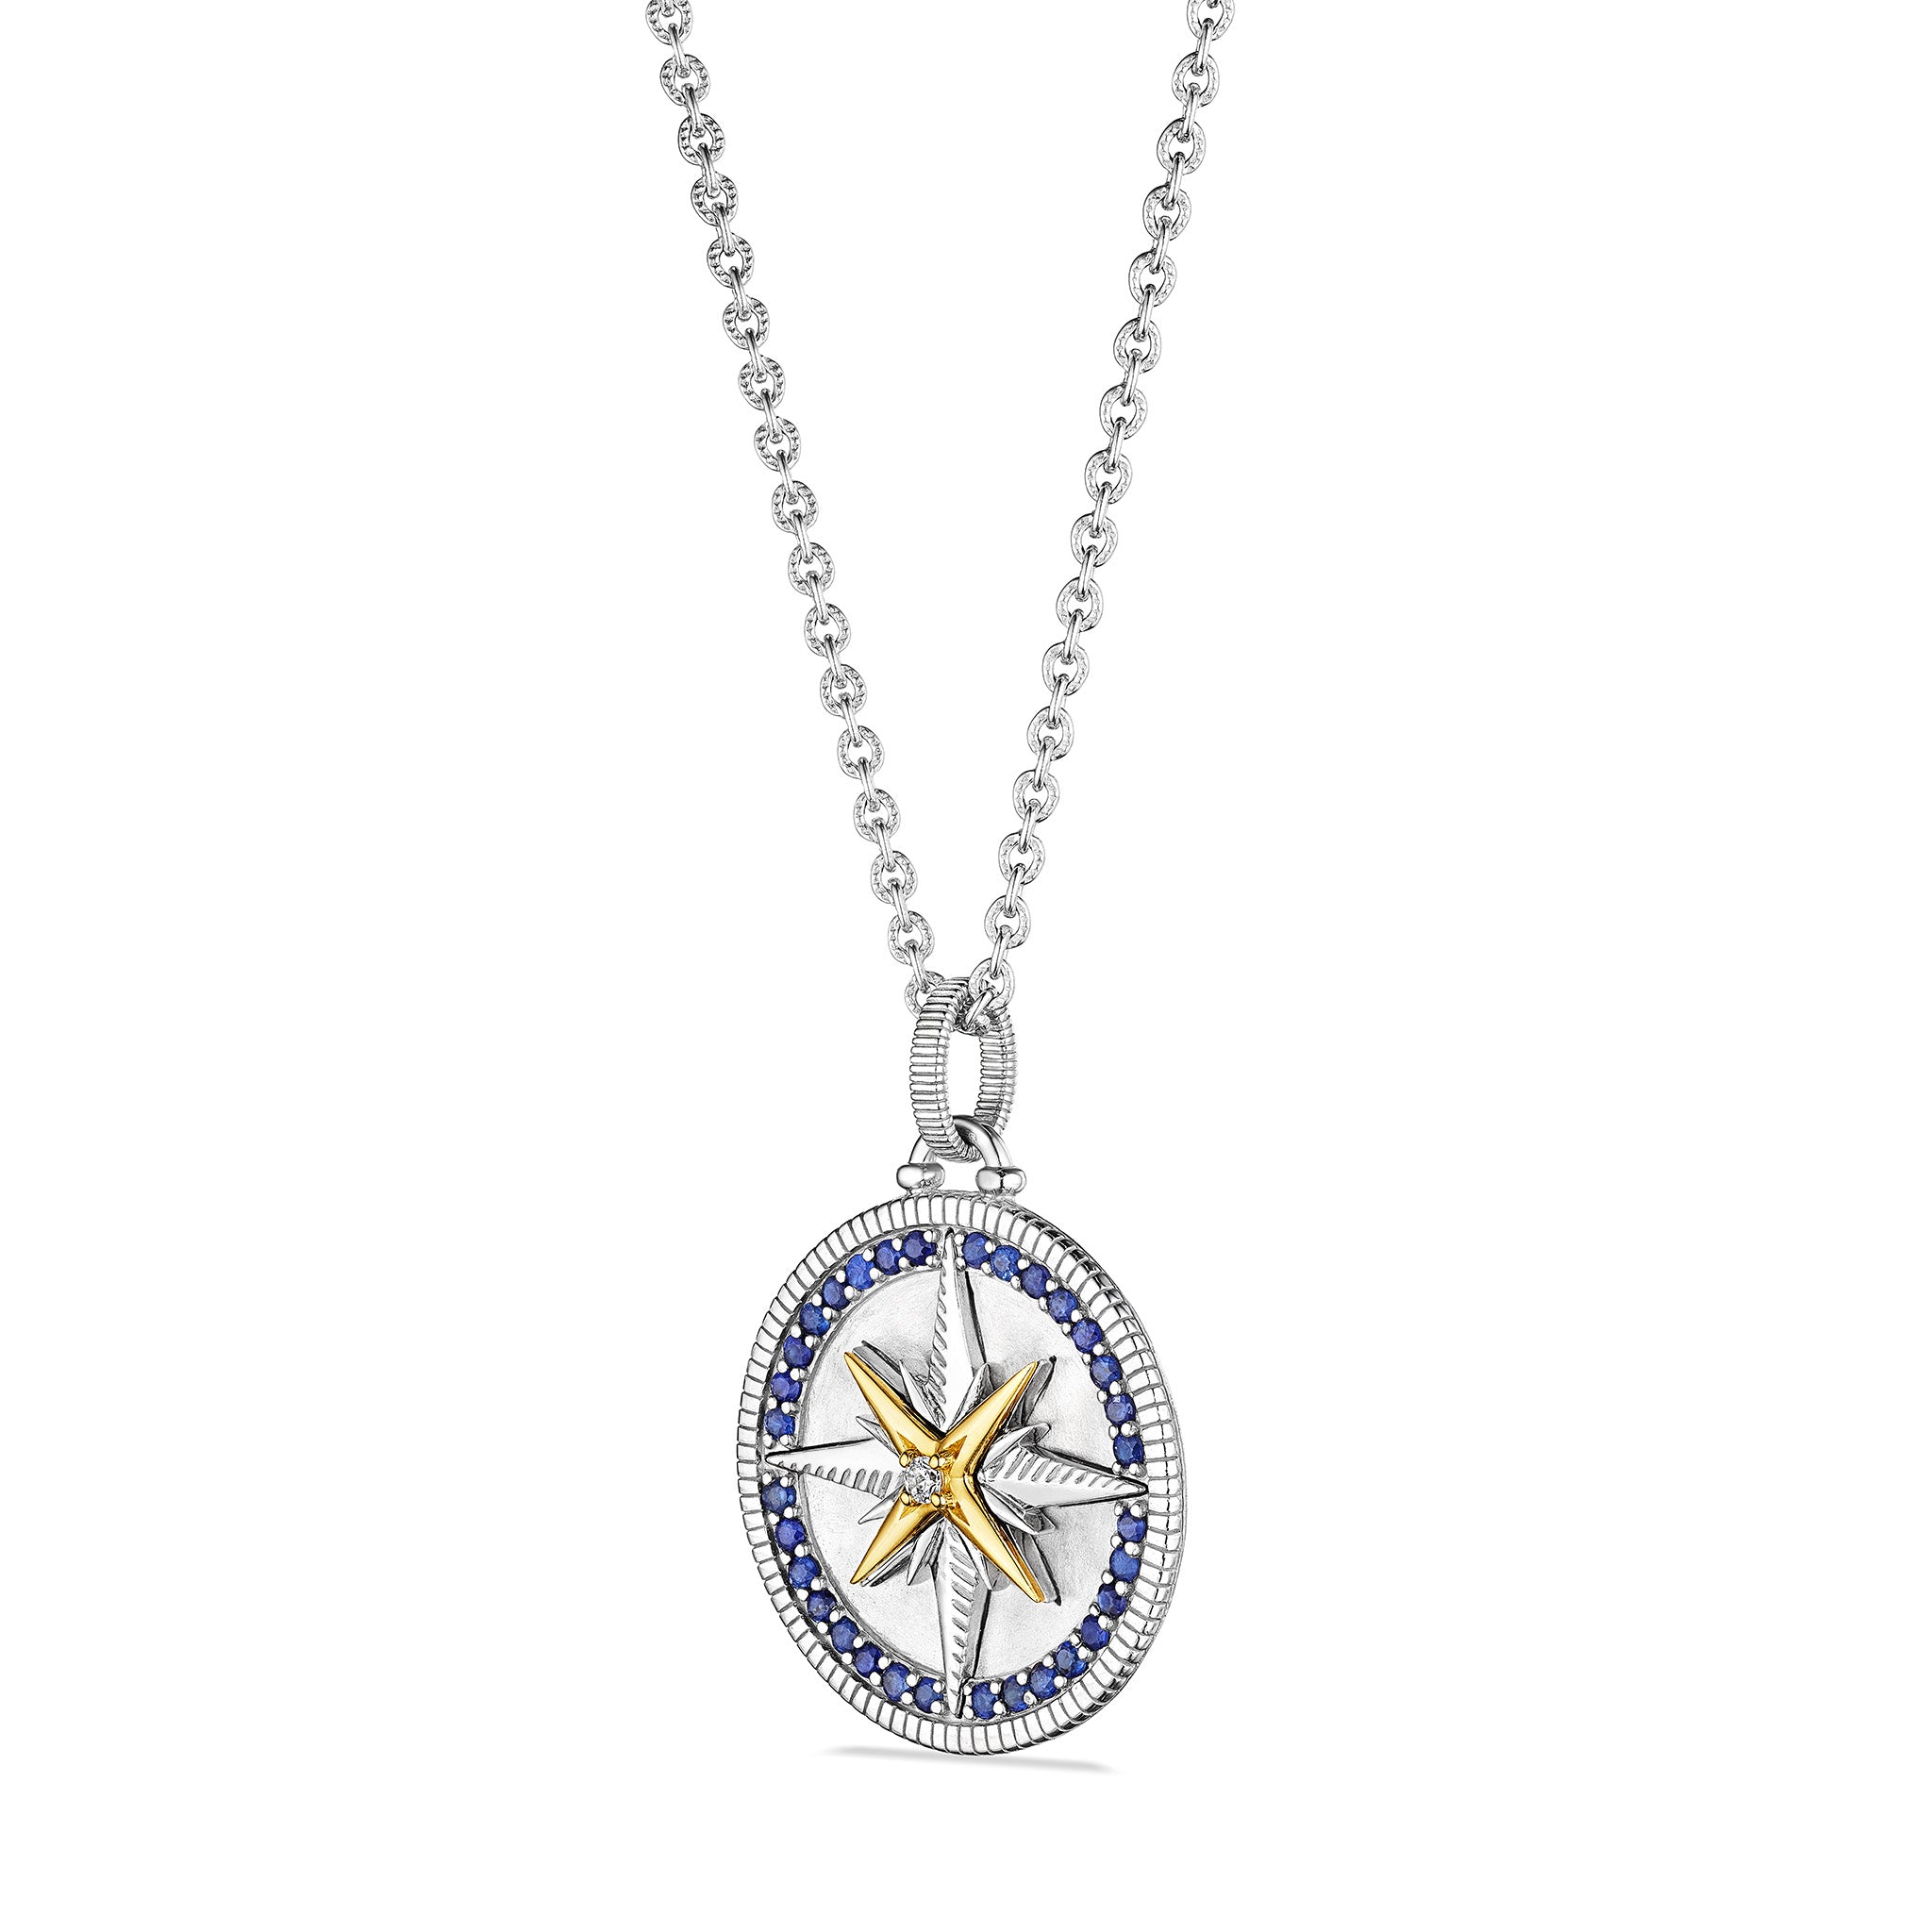 Little Luxuries Long North Star Medallion Necklace with Blue Sapphire, Diamonds and 18K Gold